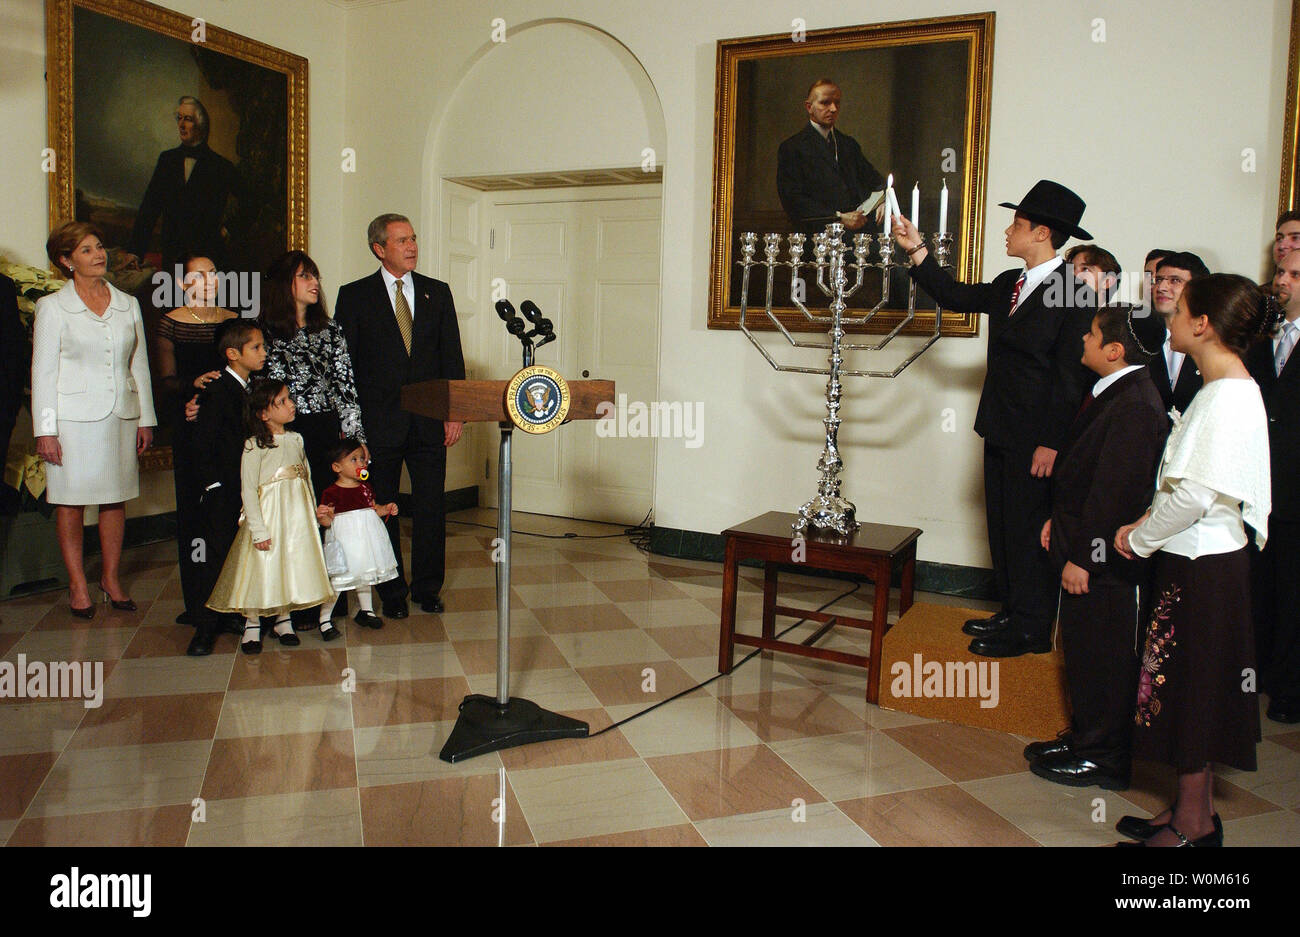 For the past three years, the President has participated in a Menorah lighting before the annual White House Hanukkah Reception. At right, Menachem Felzenberg lights the Chanukah Menorah as his siblings, Chaim, and Miriam look on, three of the six Felzenberg children.  At left are United States President George W. Bush and first lady Laura Bush with the rest of the Felzenberg family. Their father, Captain Shmuel Felzenberg, is serving in Iraq as the senior Jewish chaplain with the United States Army's 84th Engineer Battalion, from Schofield Barracks, Hawaii. Stock Photo